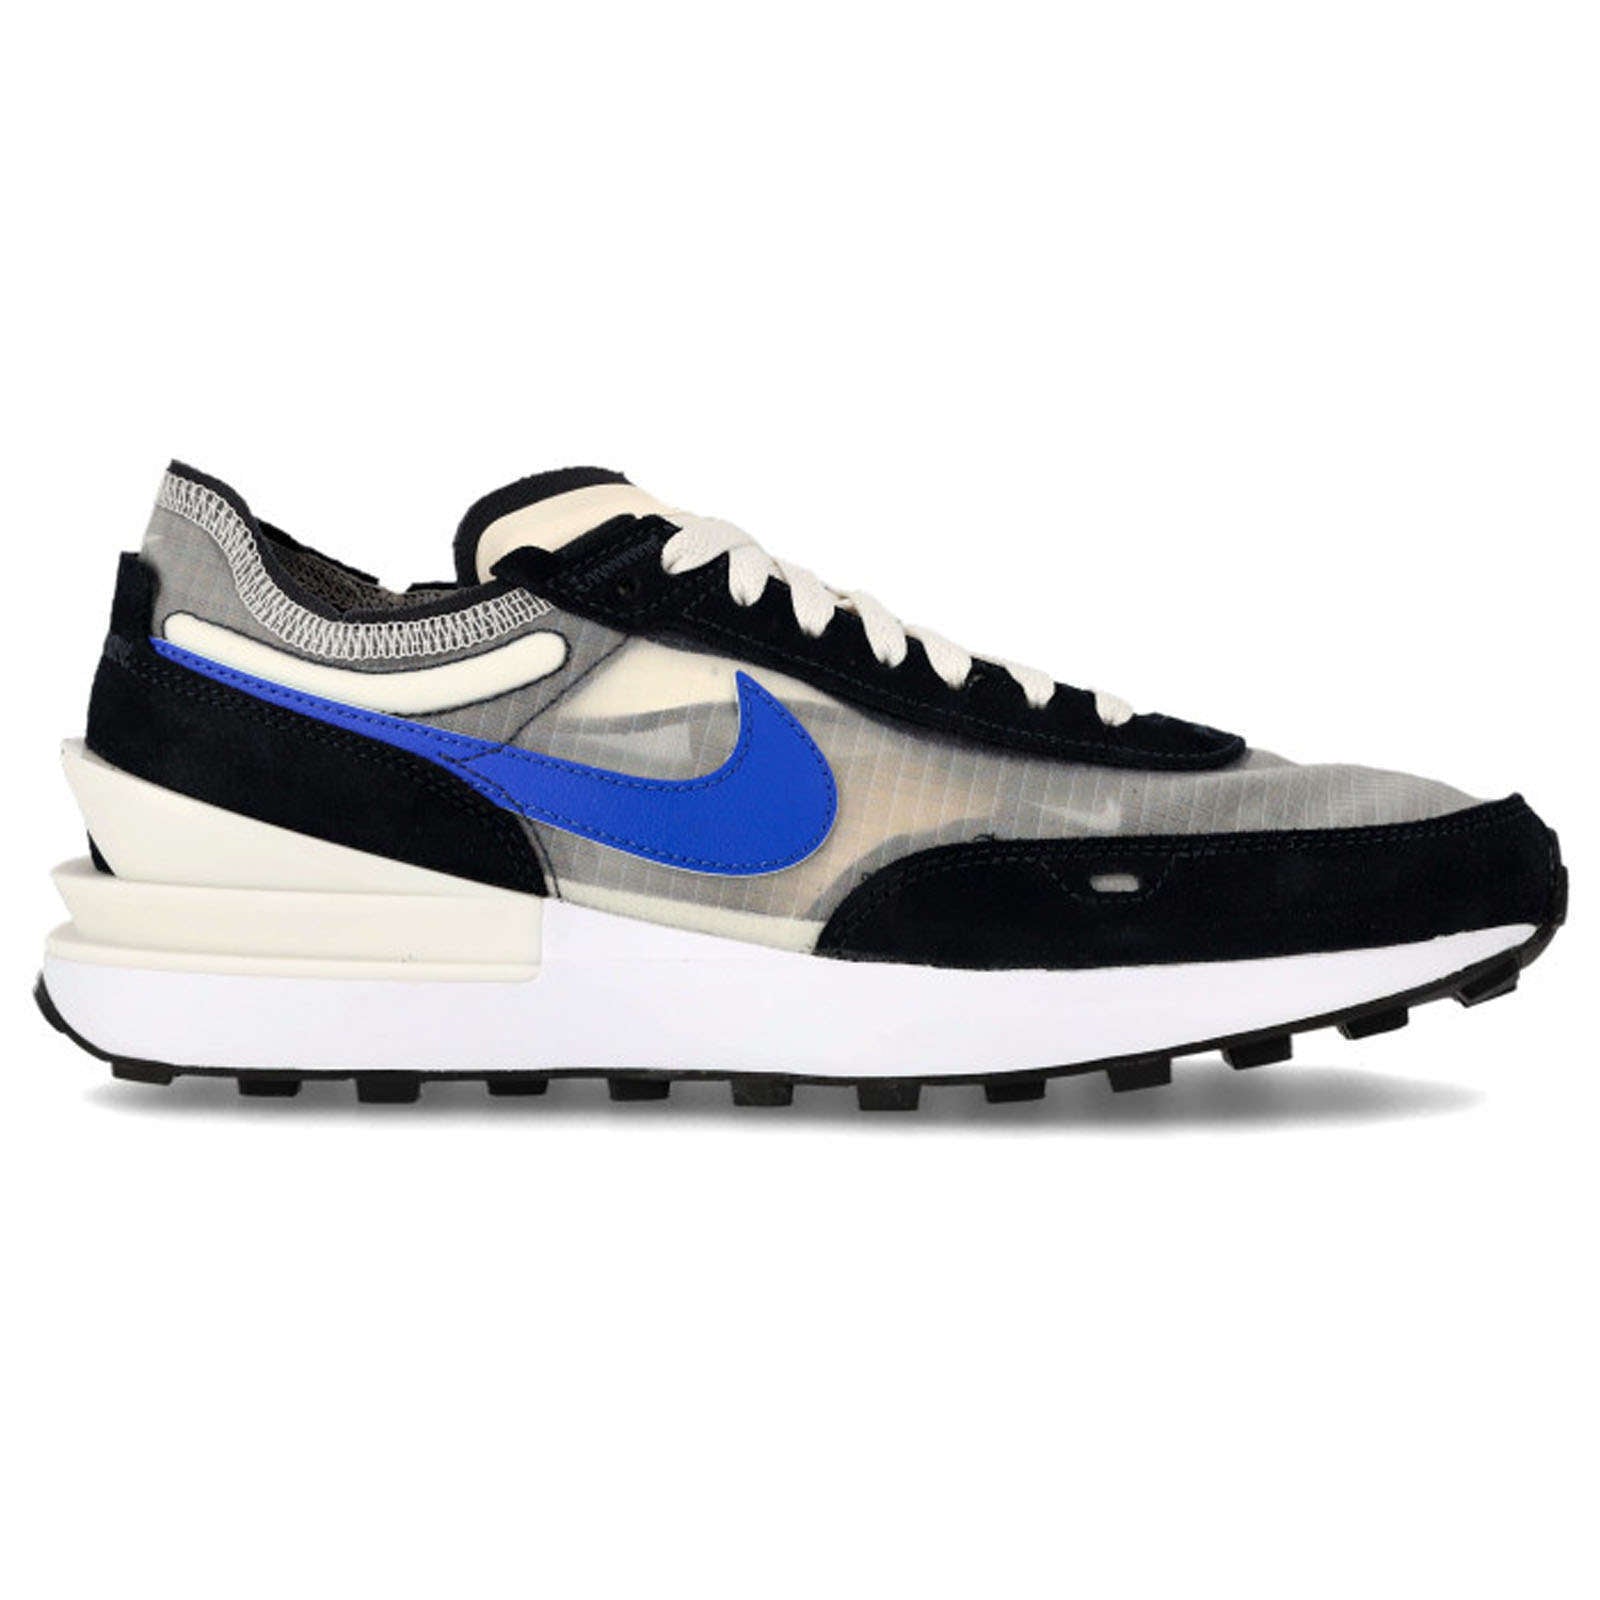 Nike Waffle One SE Leather Textile Men's Low-Top Trainers#color_phantom hyper royal